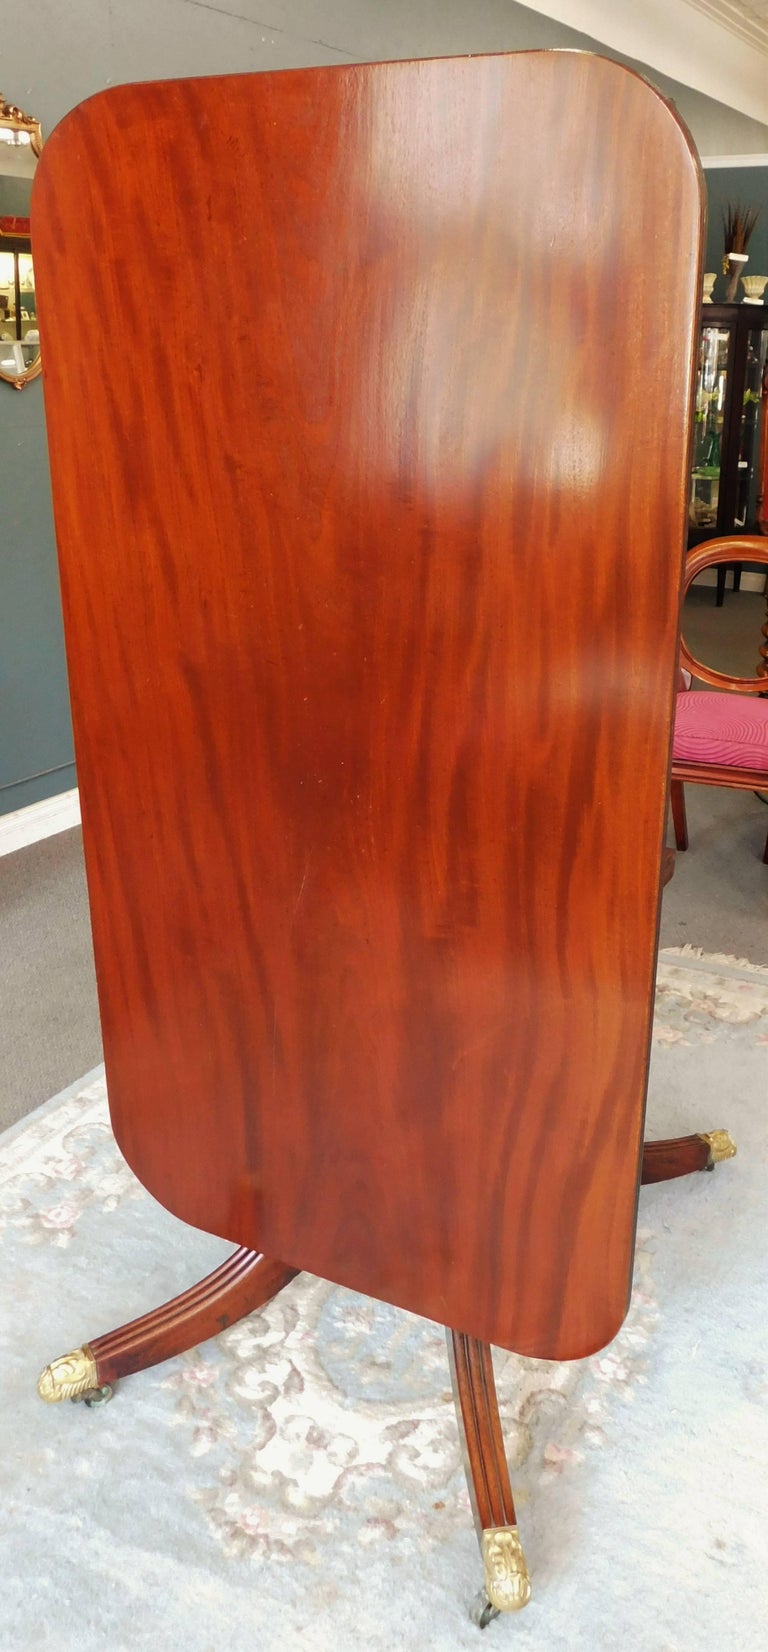 Early Victorian English Mahogany Tilt-Top Breakfast Table In Good Condition For Sale In Hamilton, Ontario